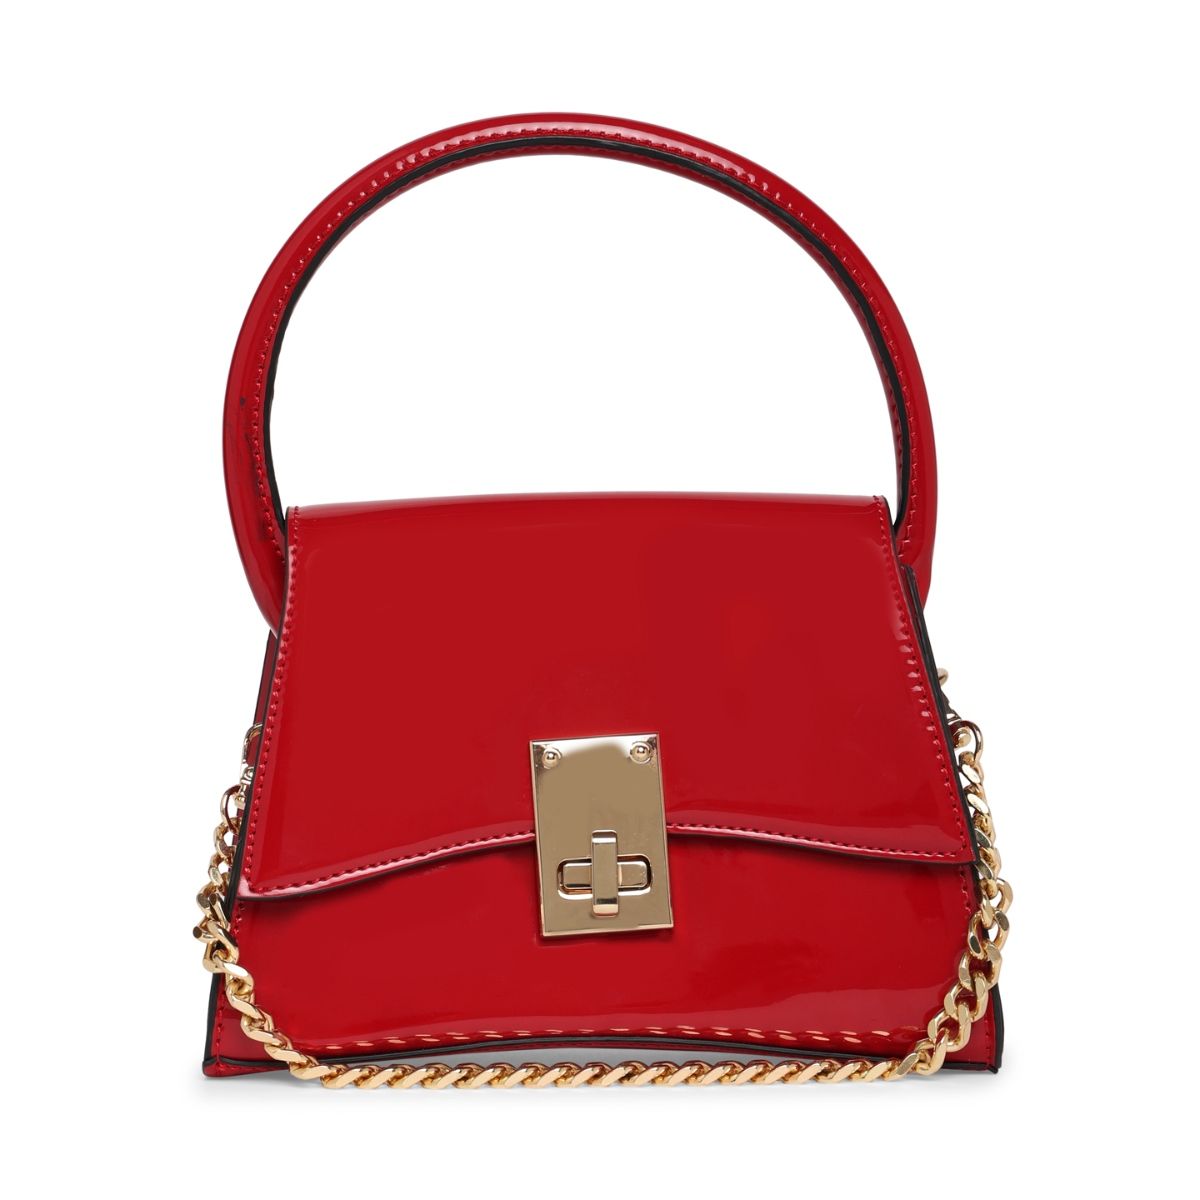 First leather handbag Balenciaga Red in Leather - 40428232